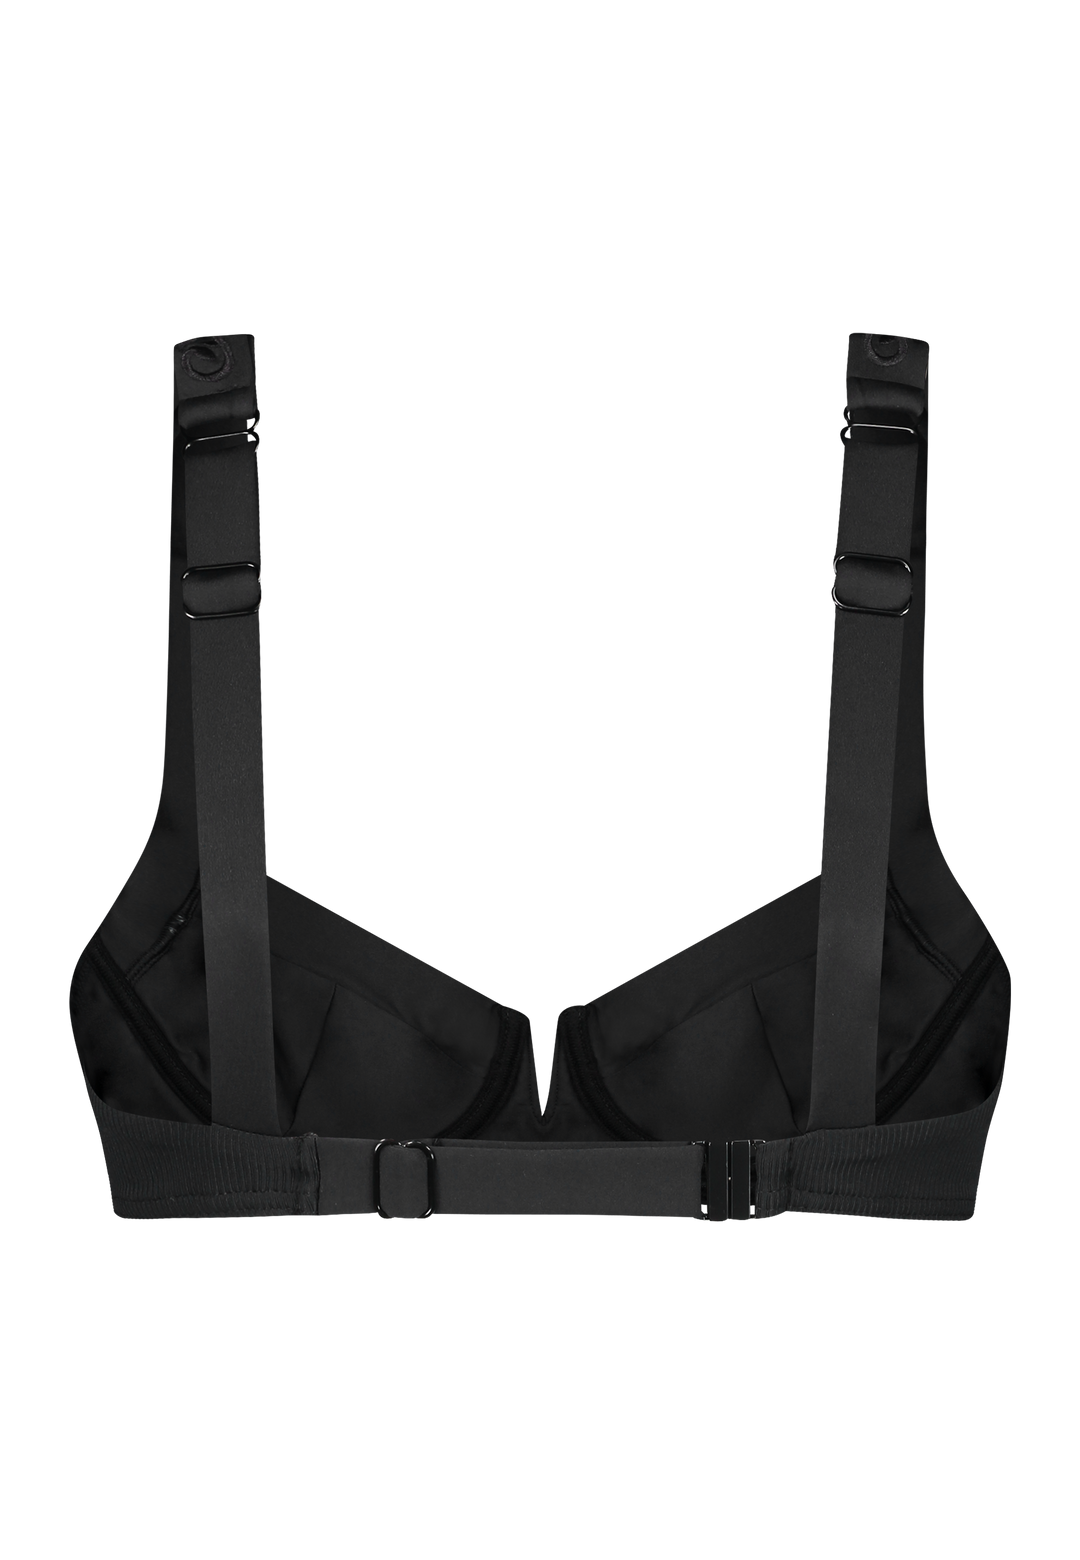 Bikini top with underwire in black with adjustable band size and shoulder straps